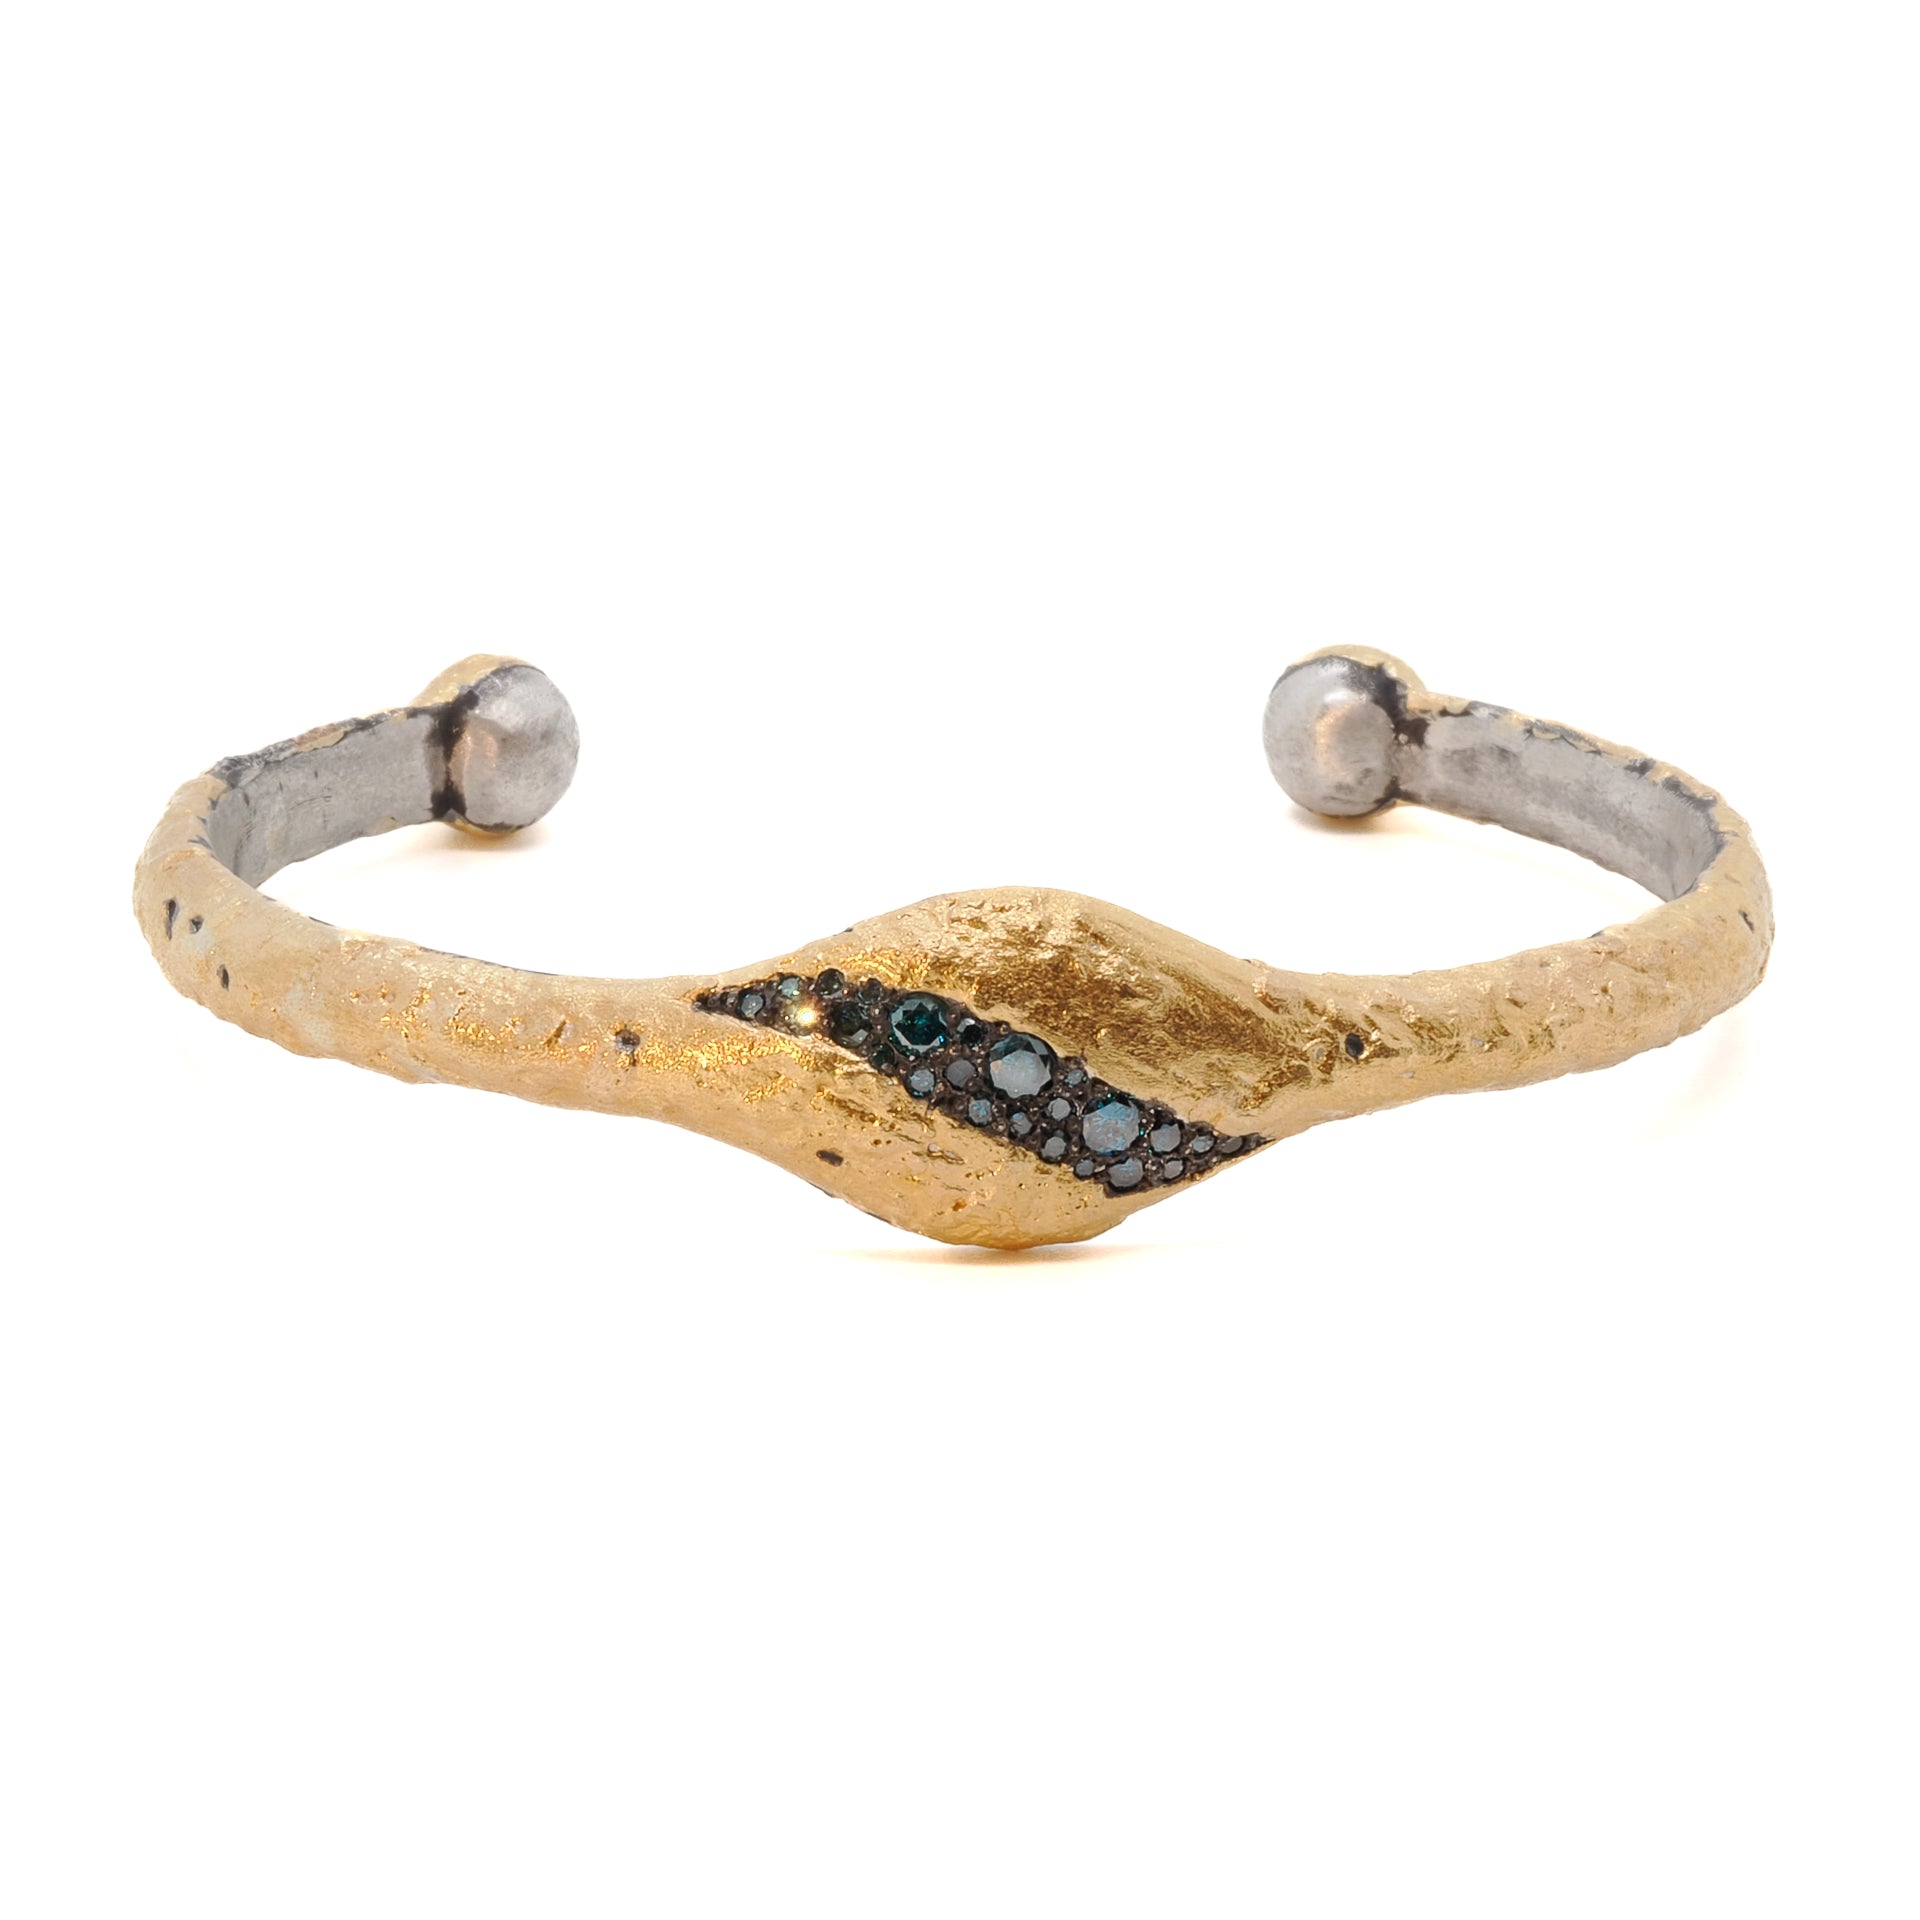 Nature Gold Petroleum Bracelet featuring a unique handmade design crafted with a 21k gold over silver surface and adorned with 2.05 carats of petroleum diamonds.